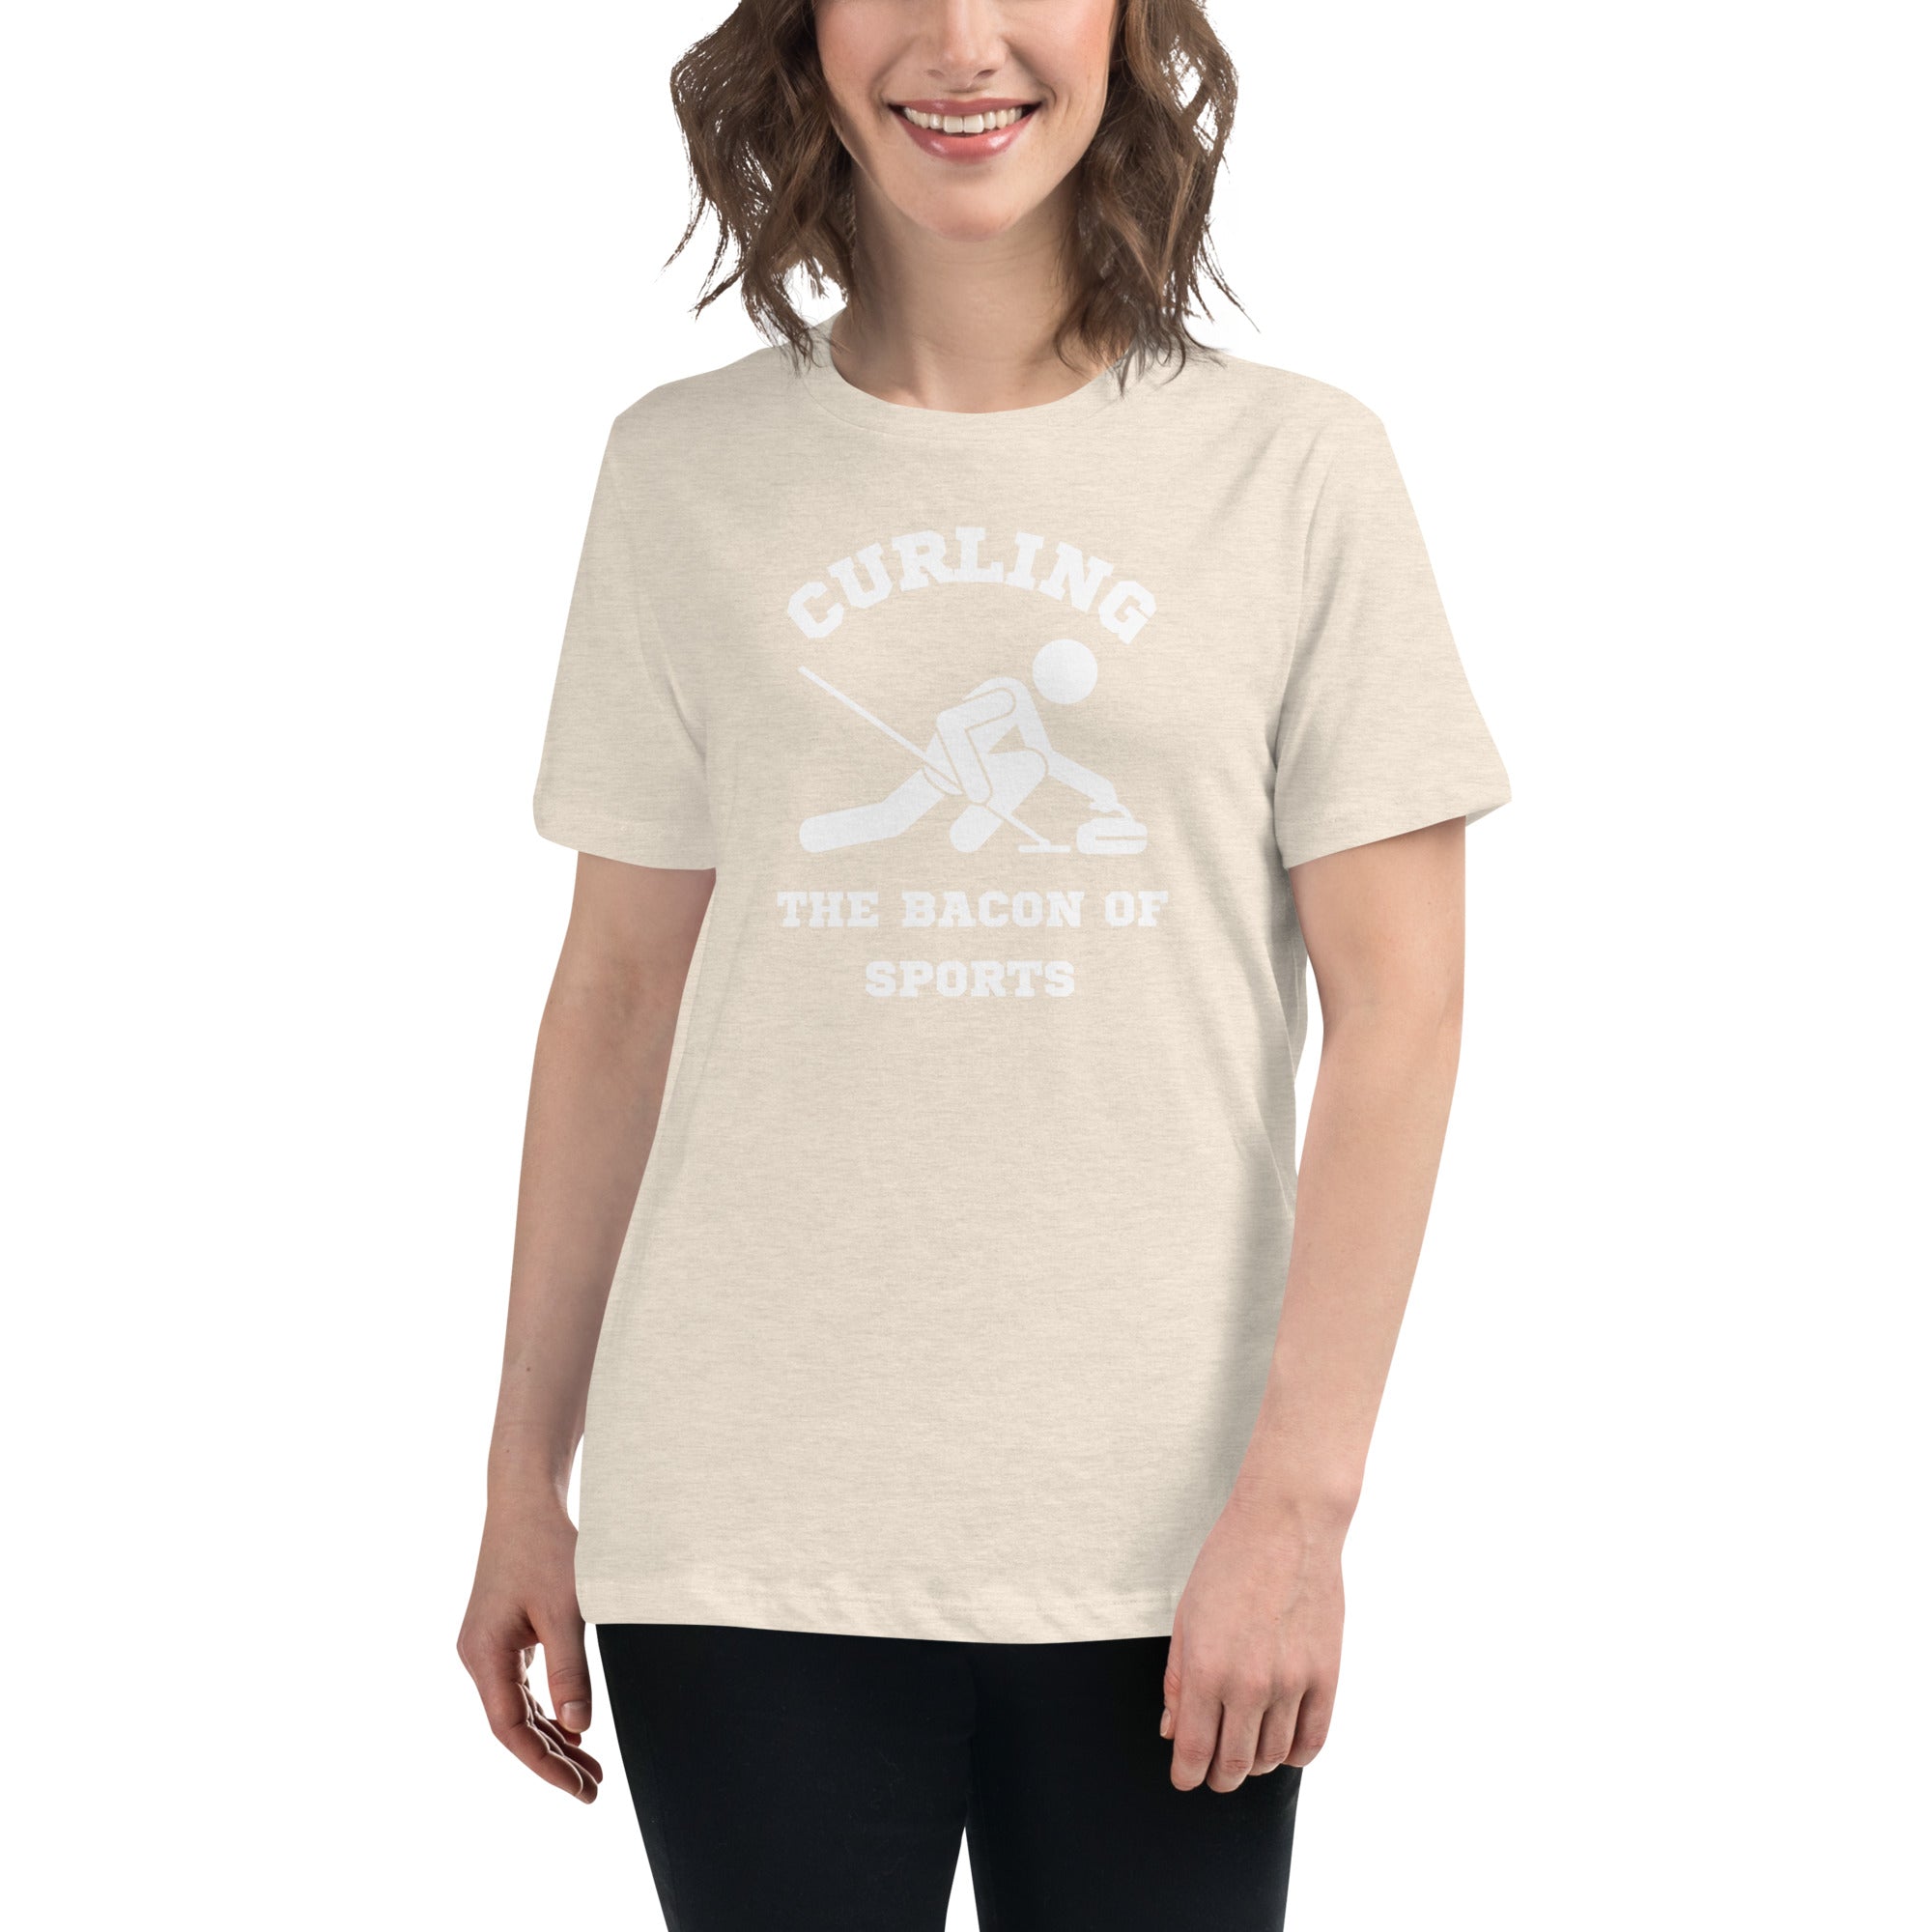 Curling The Bacon Of Sports Women's Premium T-Shirt